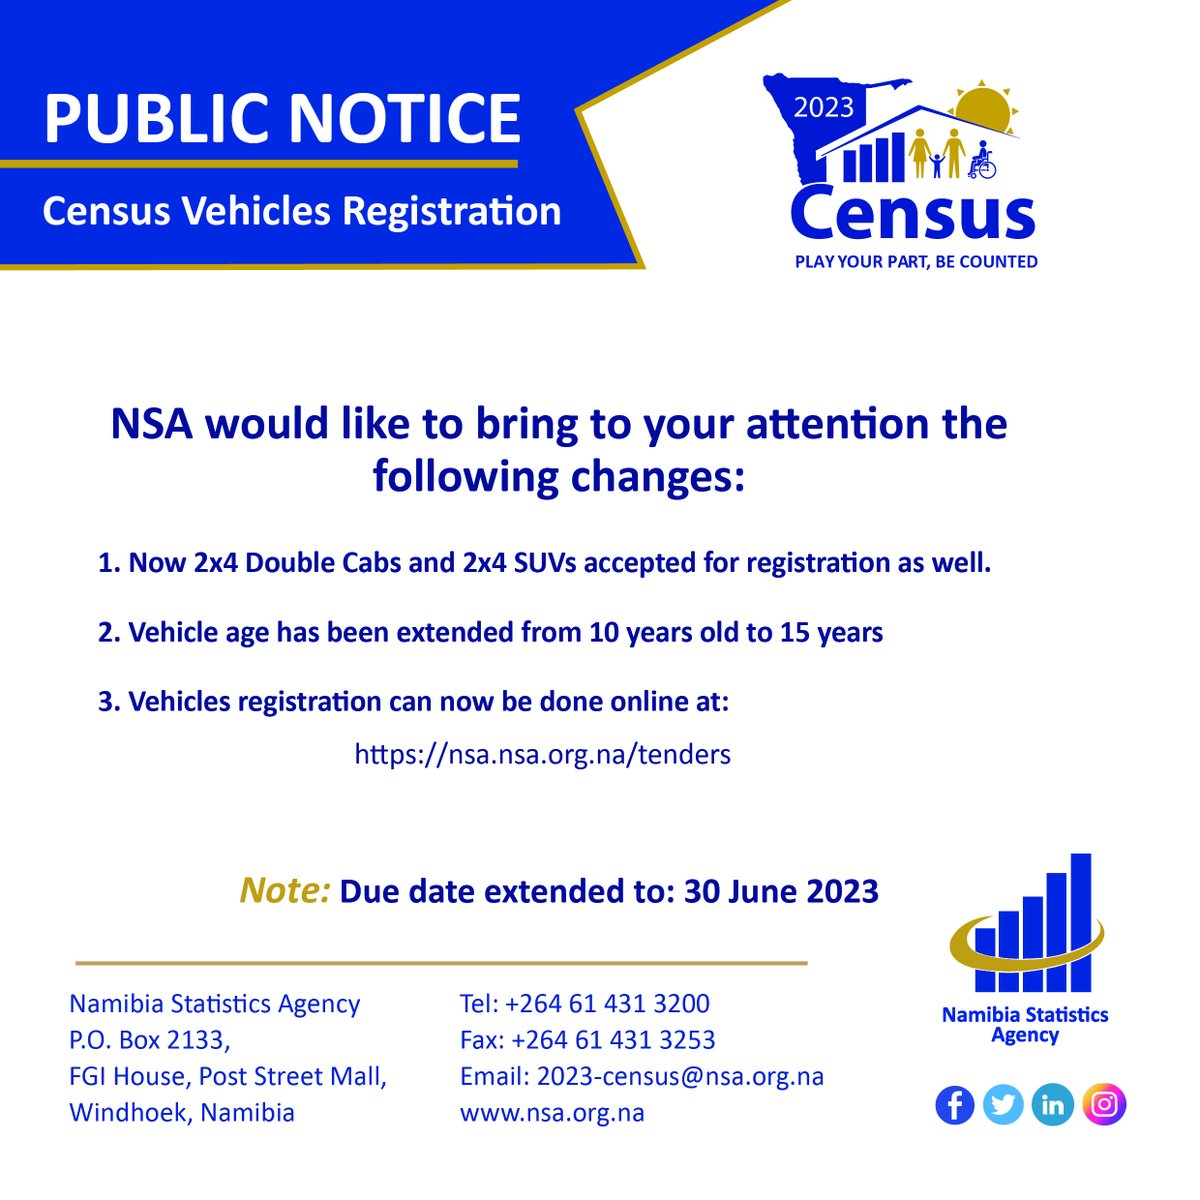 Public notice: NSA would like to inform you of the following changes to the census vehicle registration.

#nsa#2023census#vehicleregistration